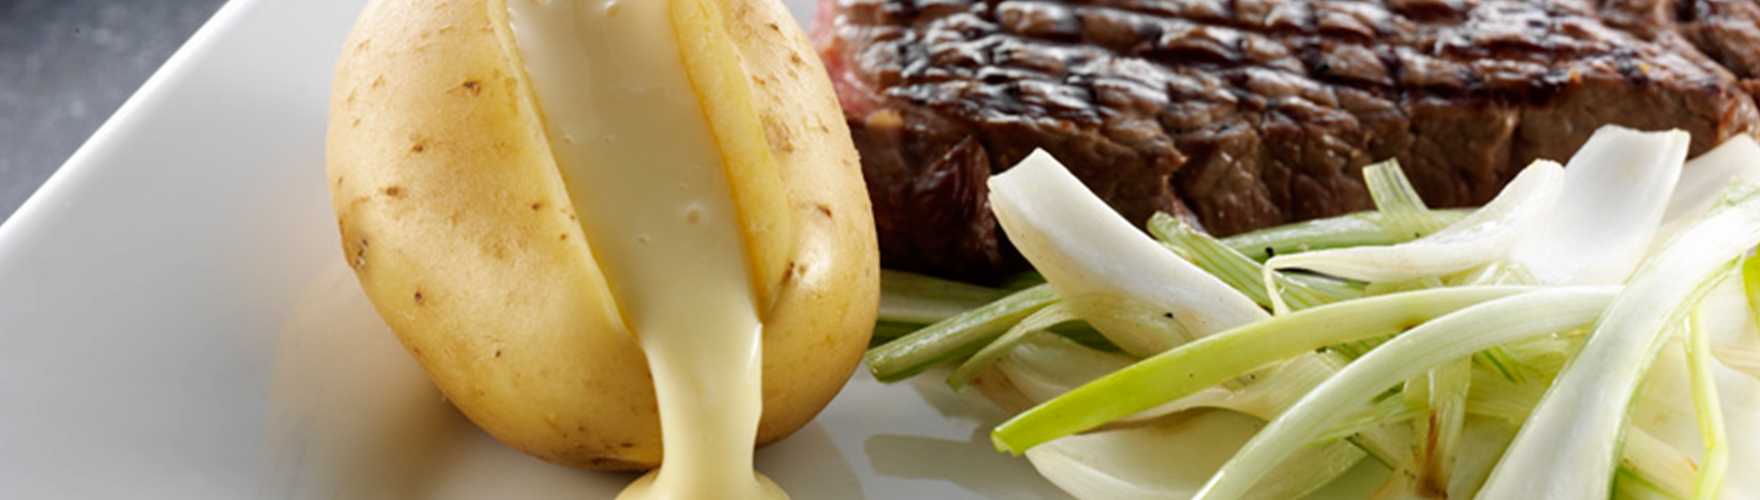 Grilled prime rib served with potatoes filled with ERU Spreadable Gouda, and braised fennel